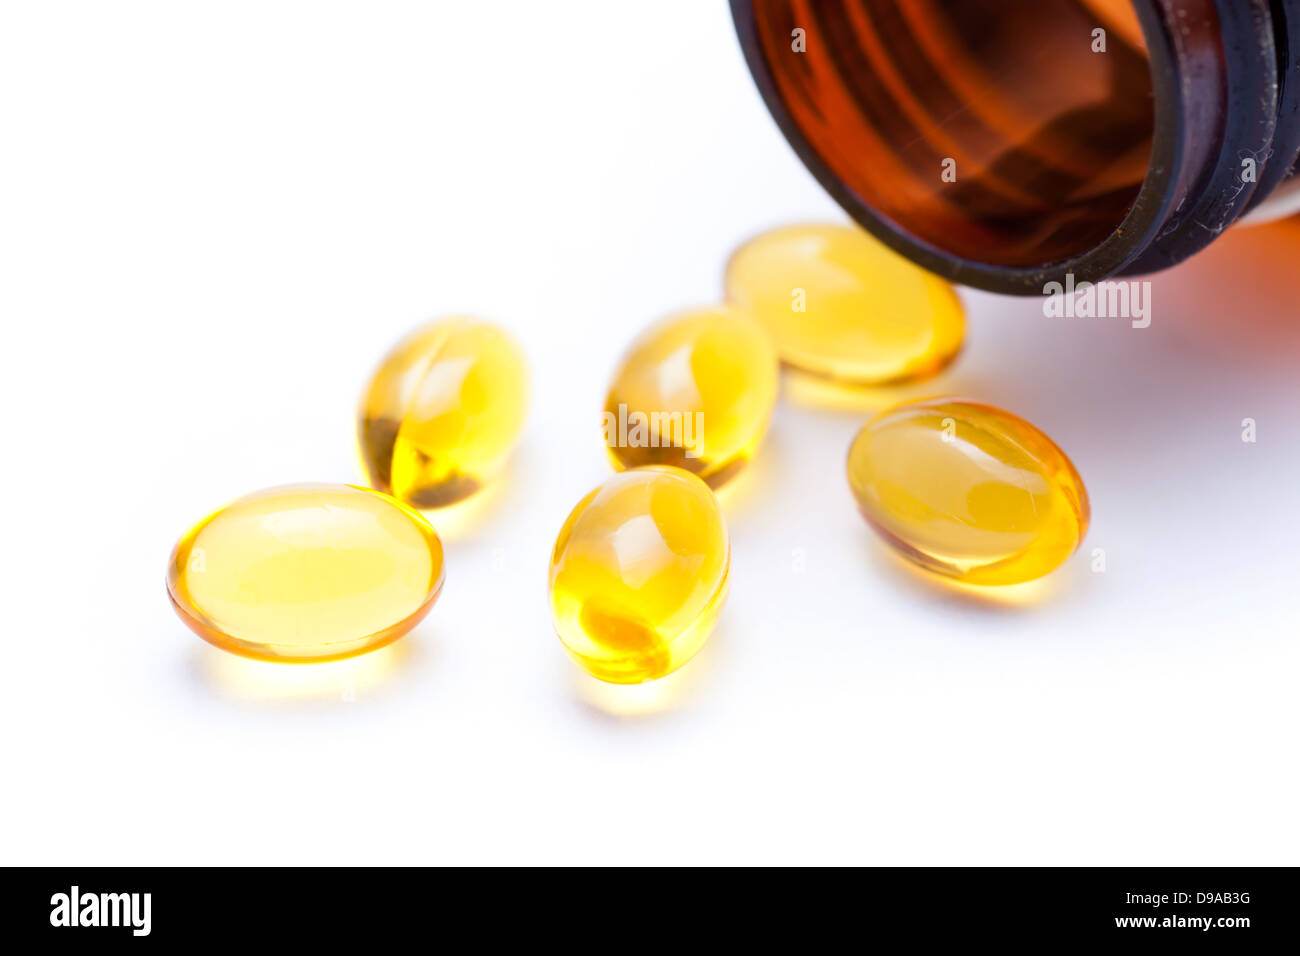 Fish oil nutritional supplement capsules Stock Photo